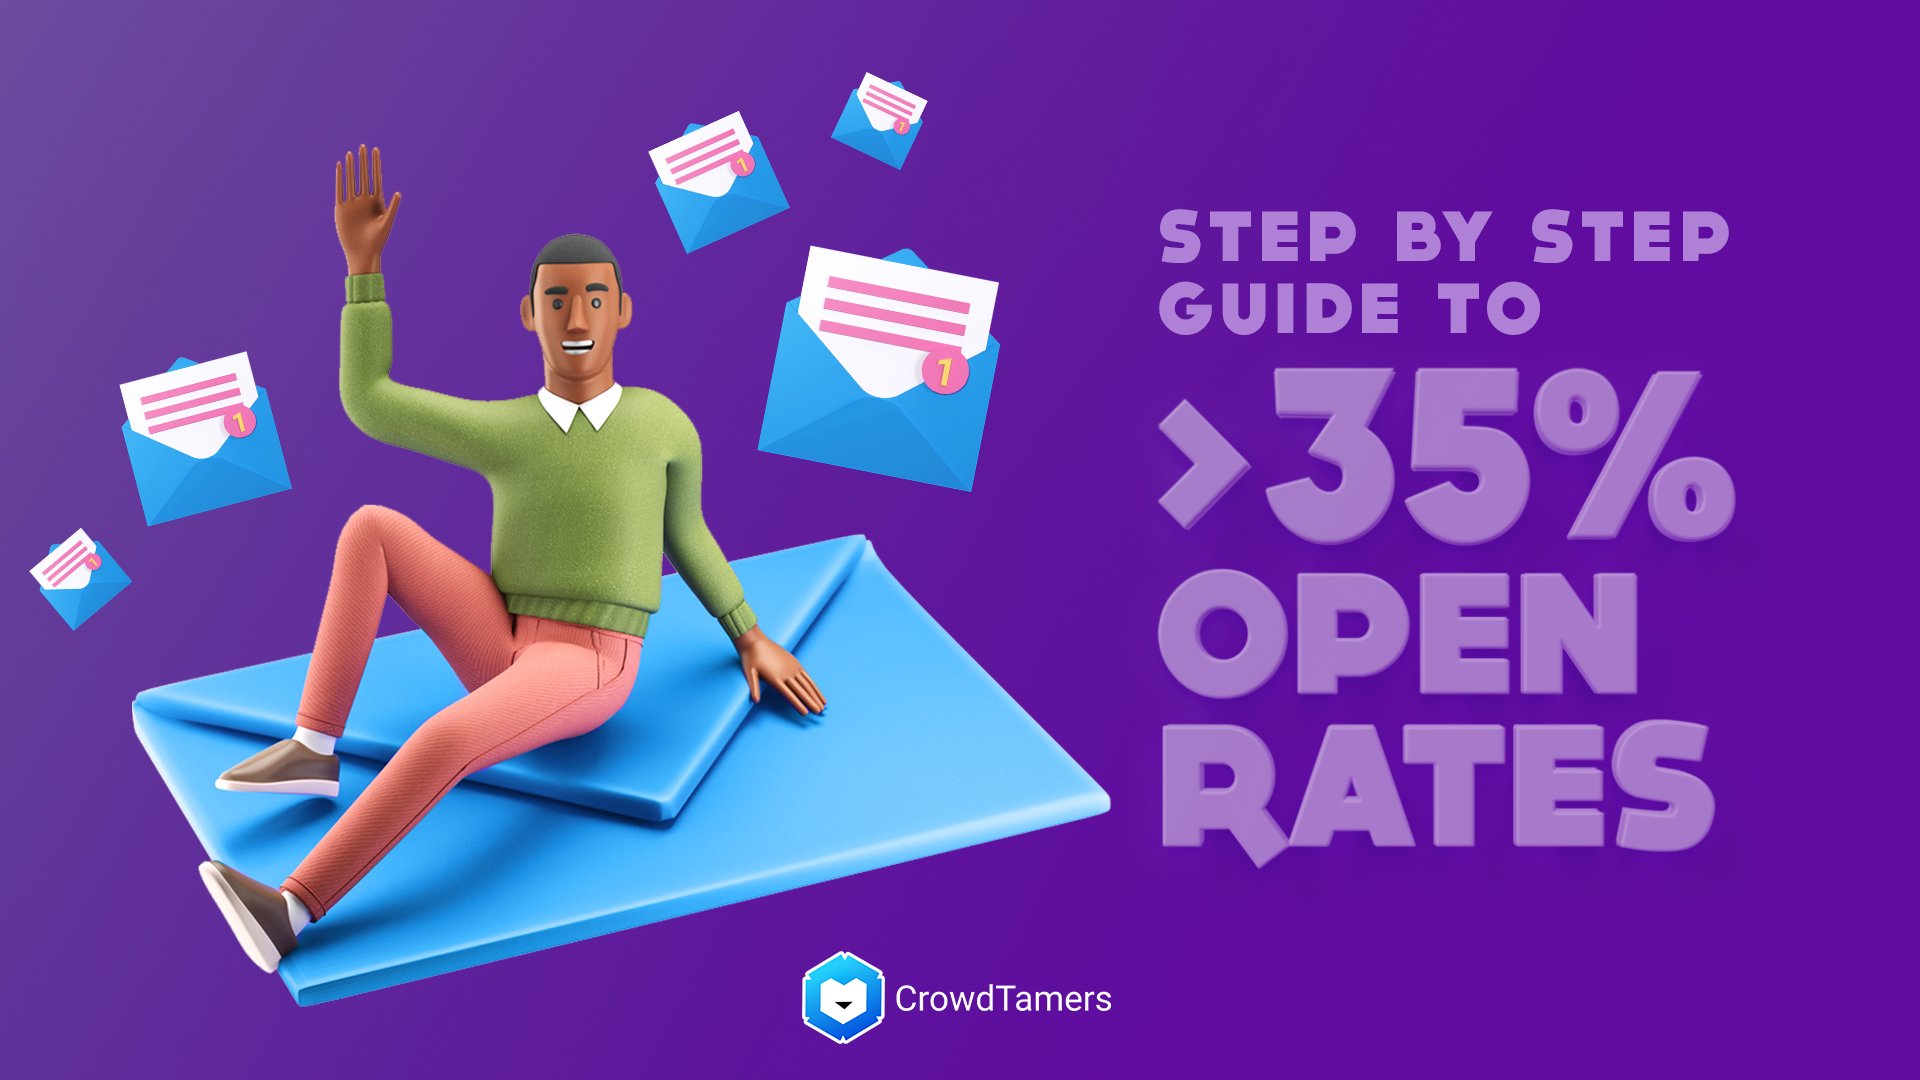 Open rates